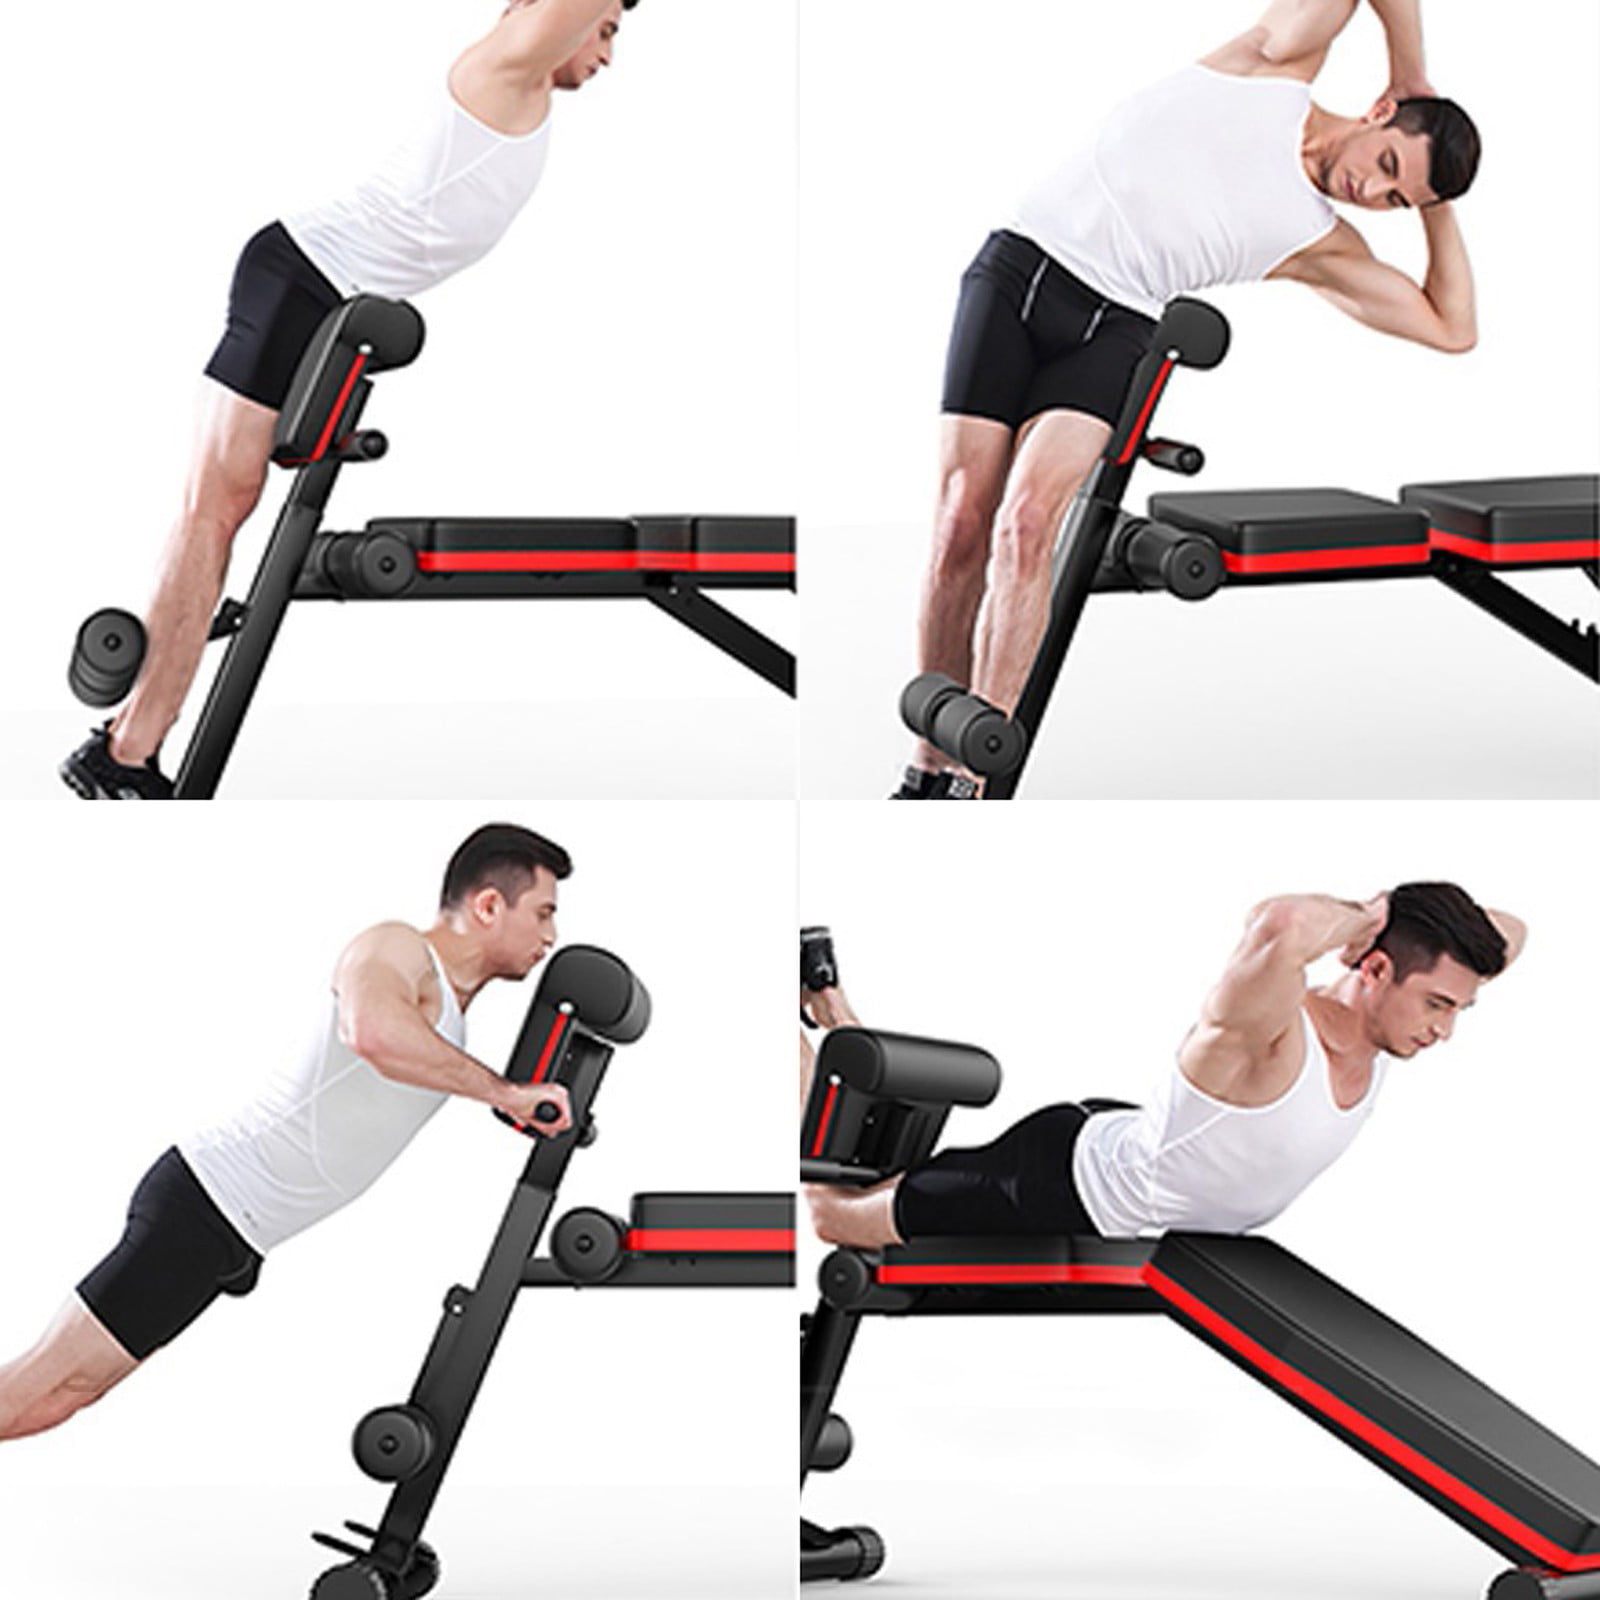 YOHOMEPRODUCTS Roman Chair Adjustable Sit Up Incline Abs